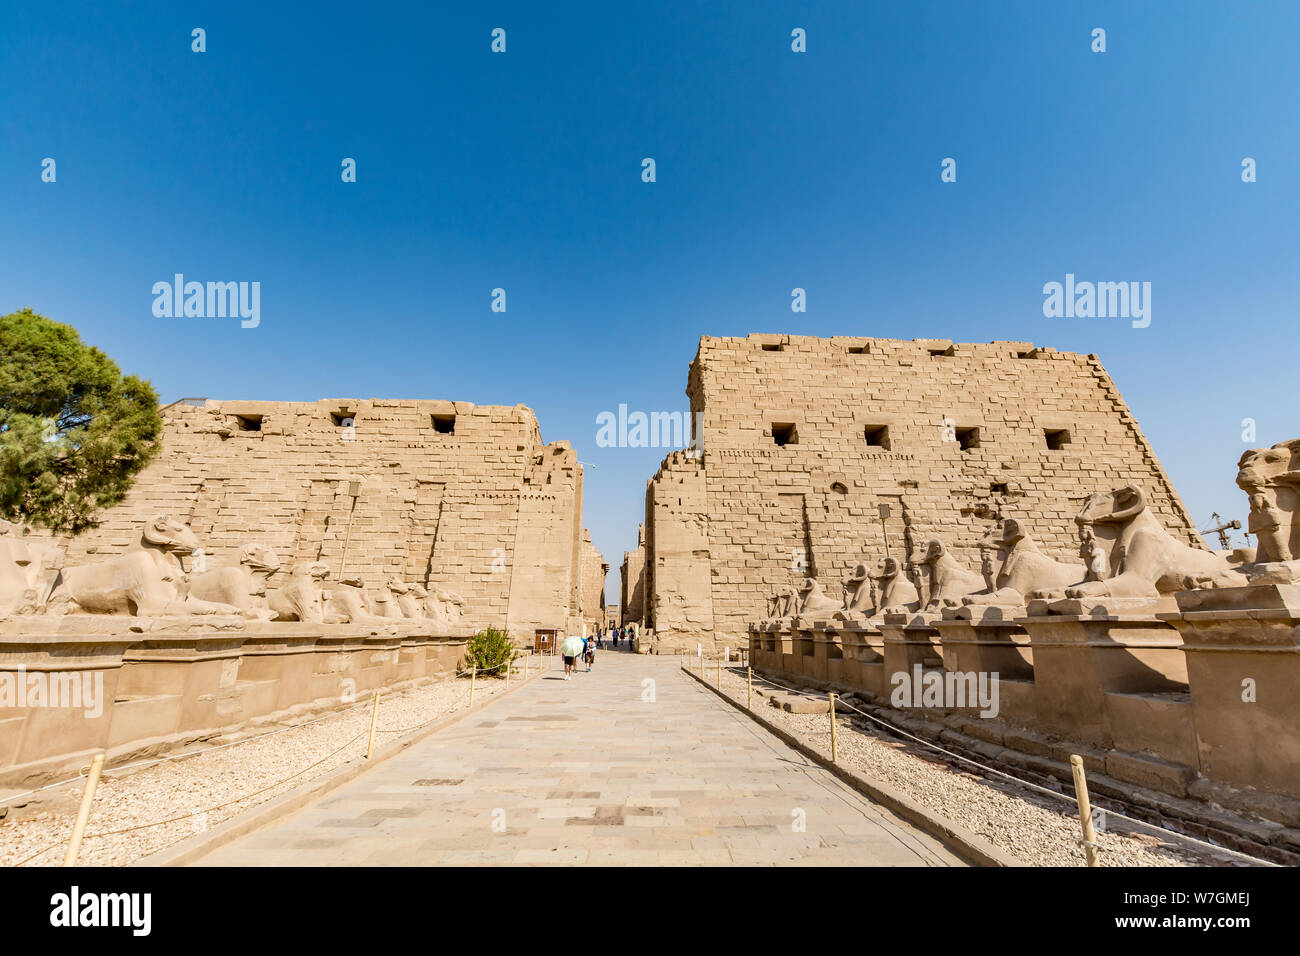 Entrance to the Karnak Temple in Luxor, Egypt Stock Photo